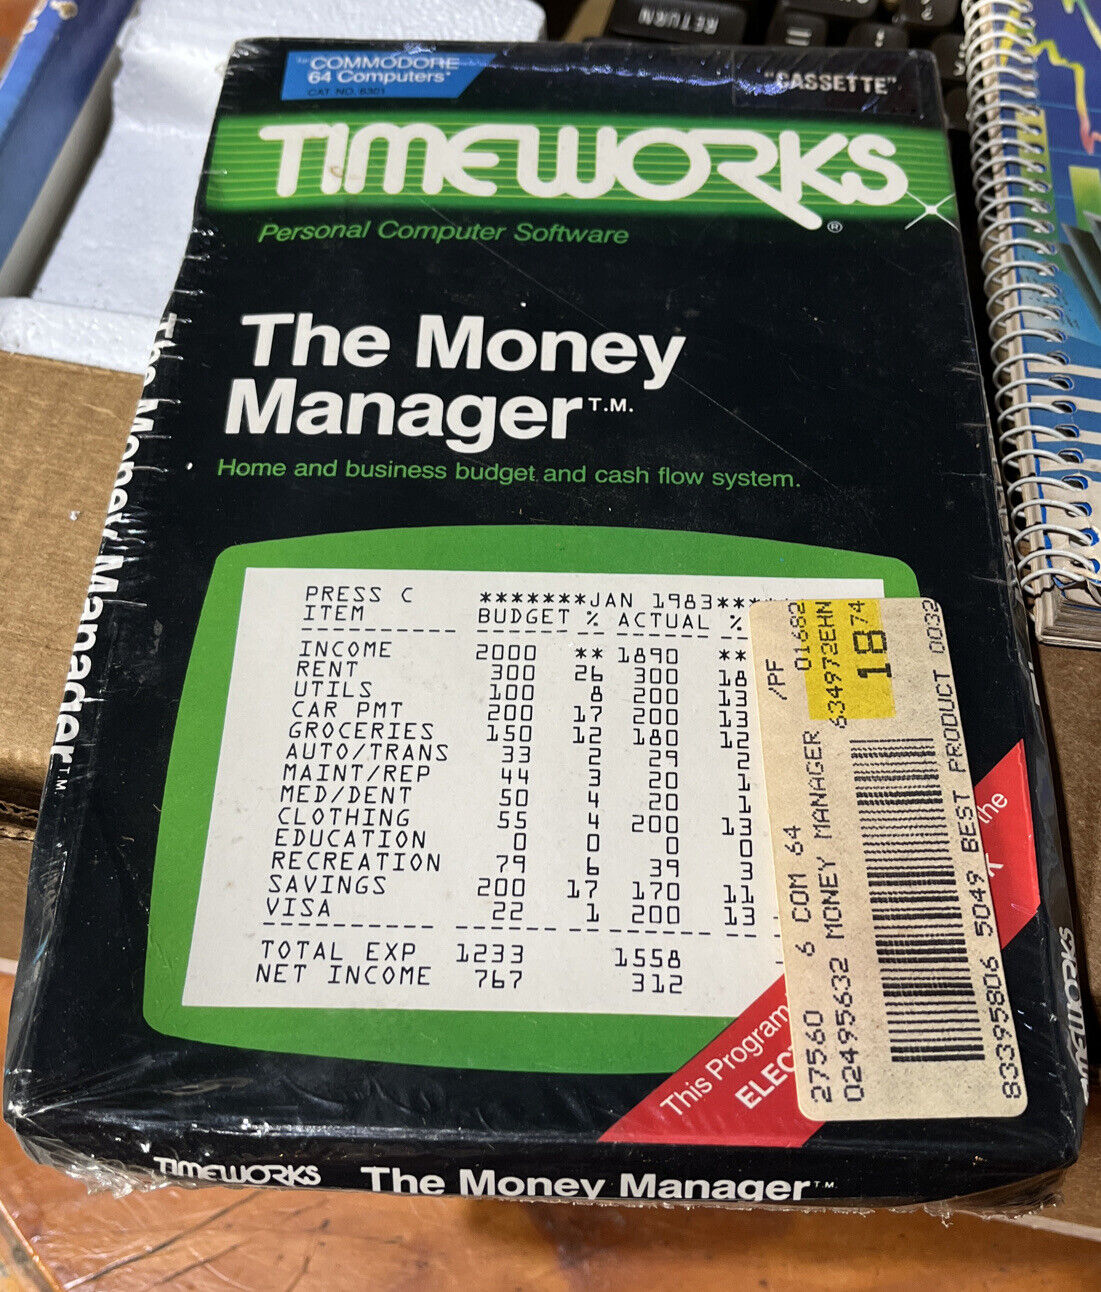 Commodore 64 Timeworks The Money Manager Disk (Rare) Sealed. NIP